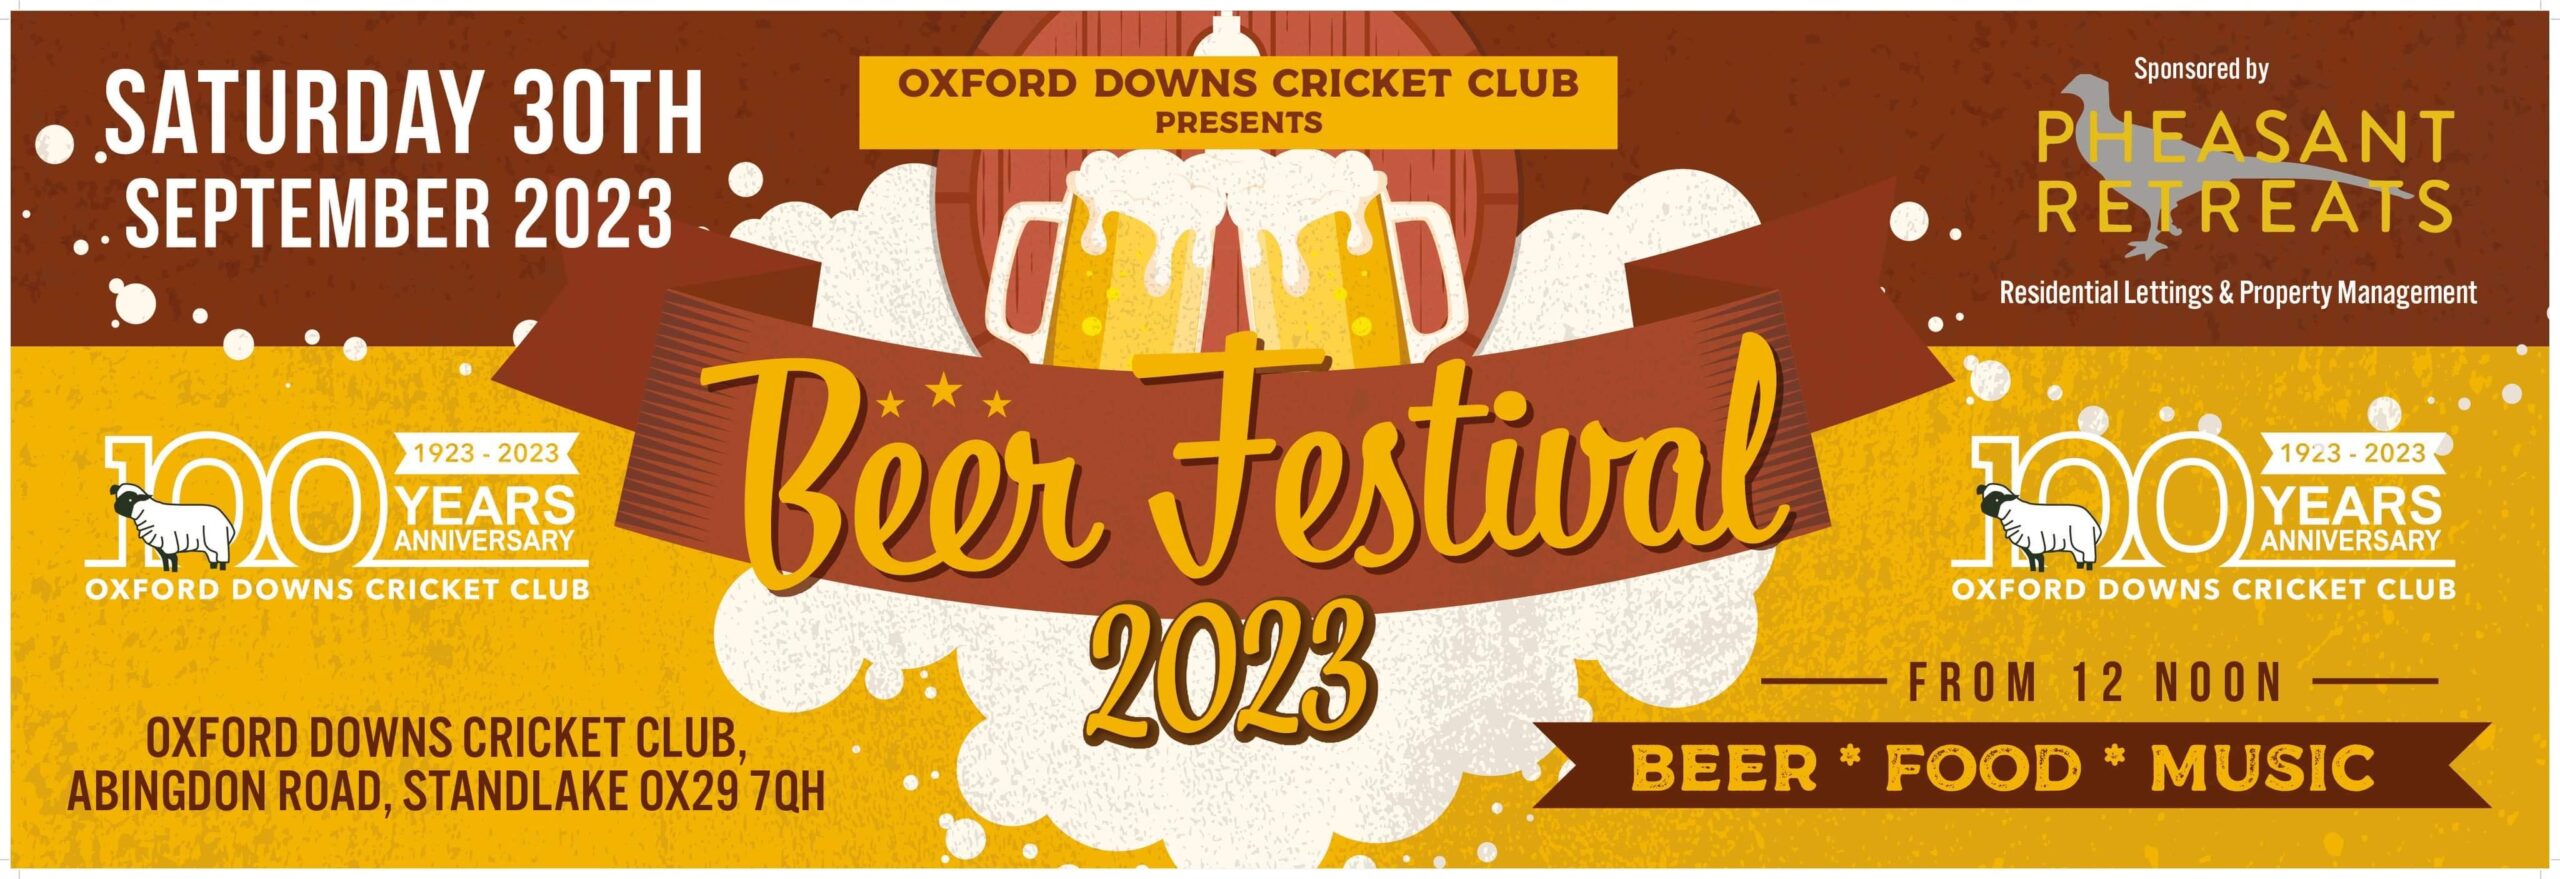 ODCC Beerfest 2023 - 30th Sept